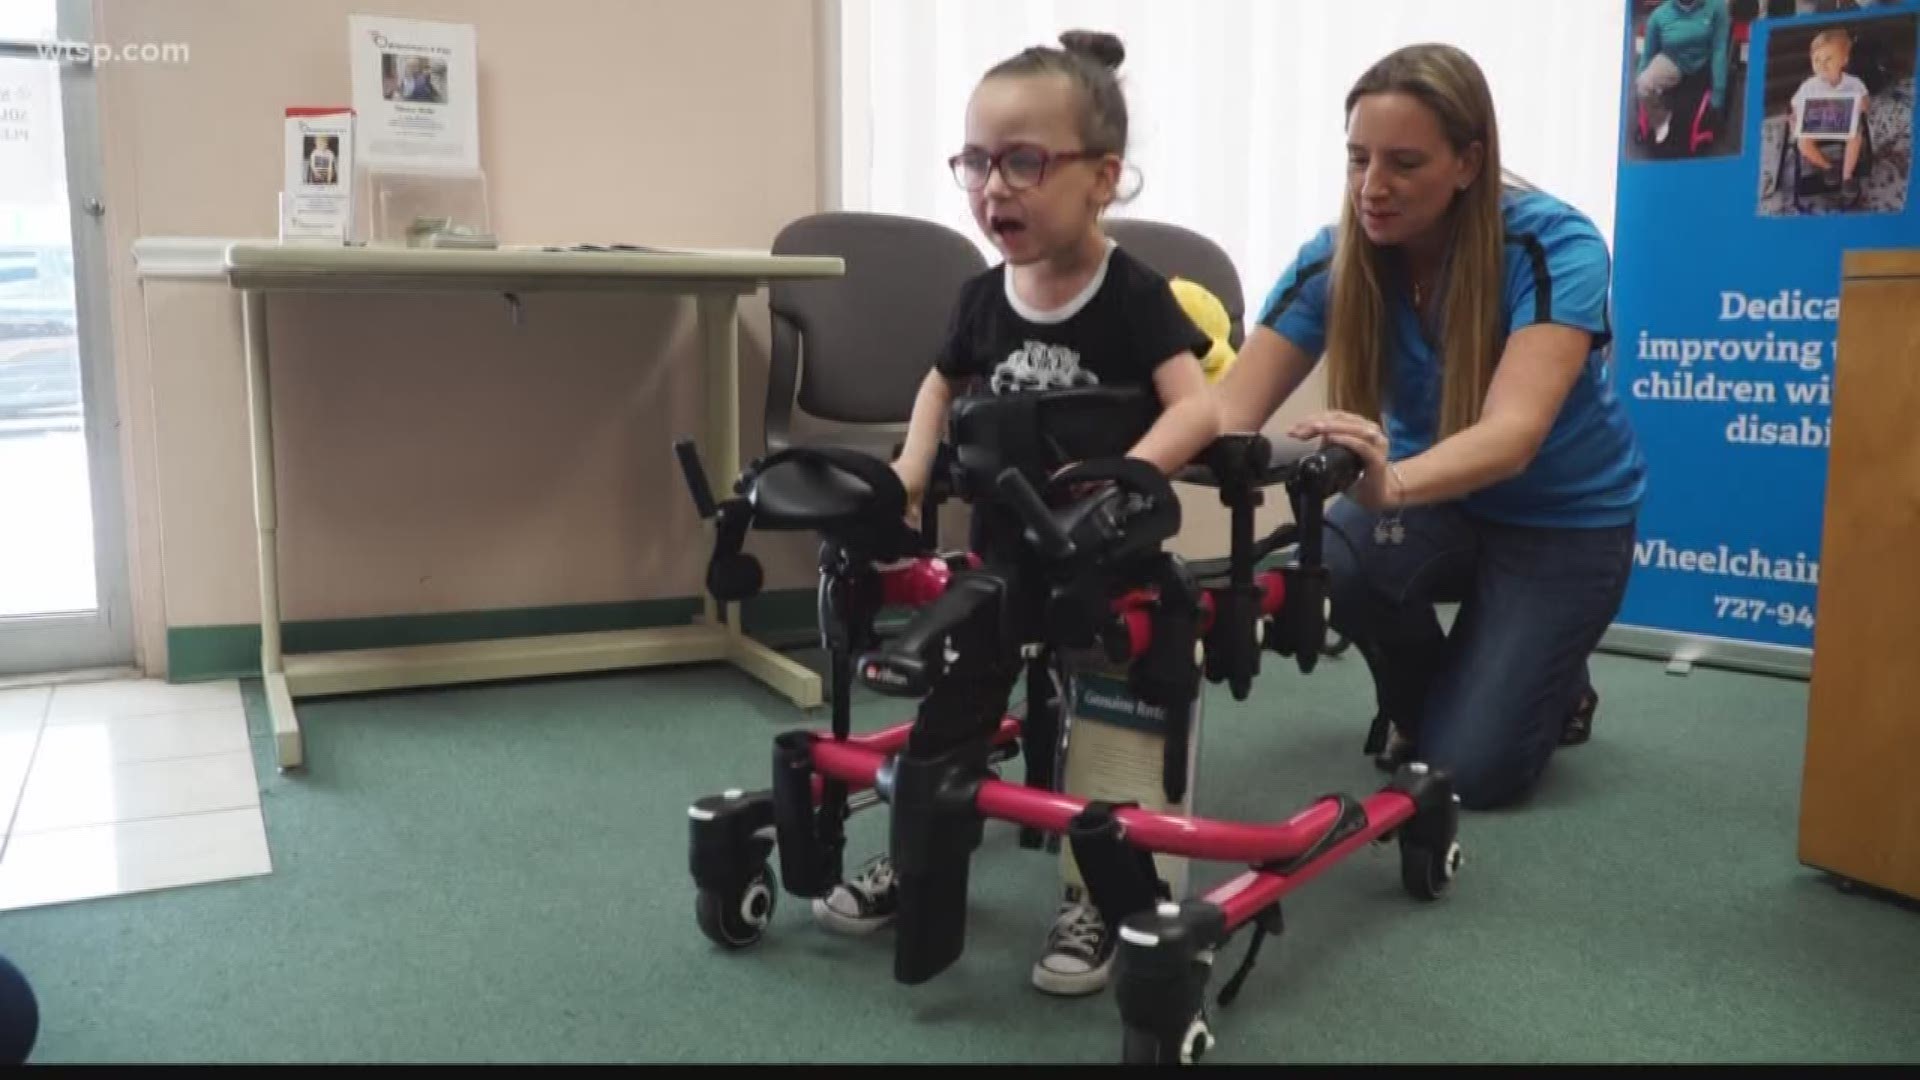 Their motto is “improving the lives of children with physical disabilities,” and that is just what a local nonprofit, Wheelchairs 4 Kids did. On Friday, 4-year-old Josie received a gait trainer.  
She was diagnosed with cerebral palsy, is nonverbal and needs assistance to walk. Nina Shaw, Program Coordinator for Wheelchairs 4 Kids says the gait trainer “will get her into the pattern of walking and be able to walk on her own in a supportive manner."